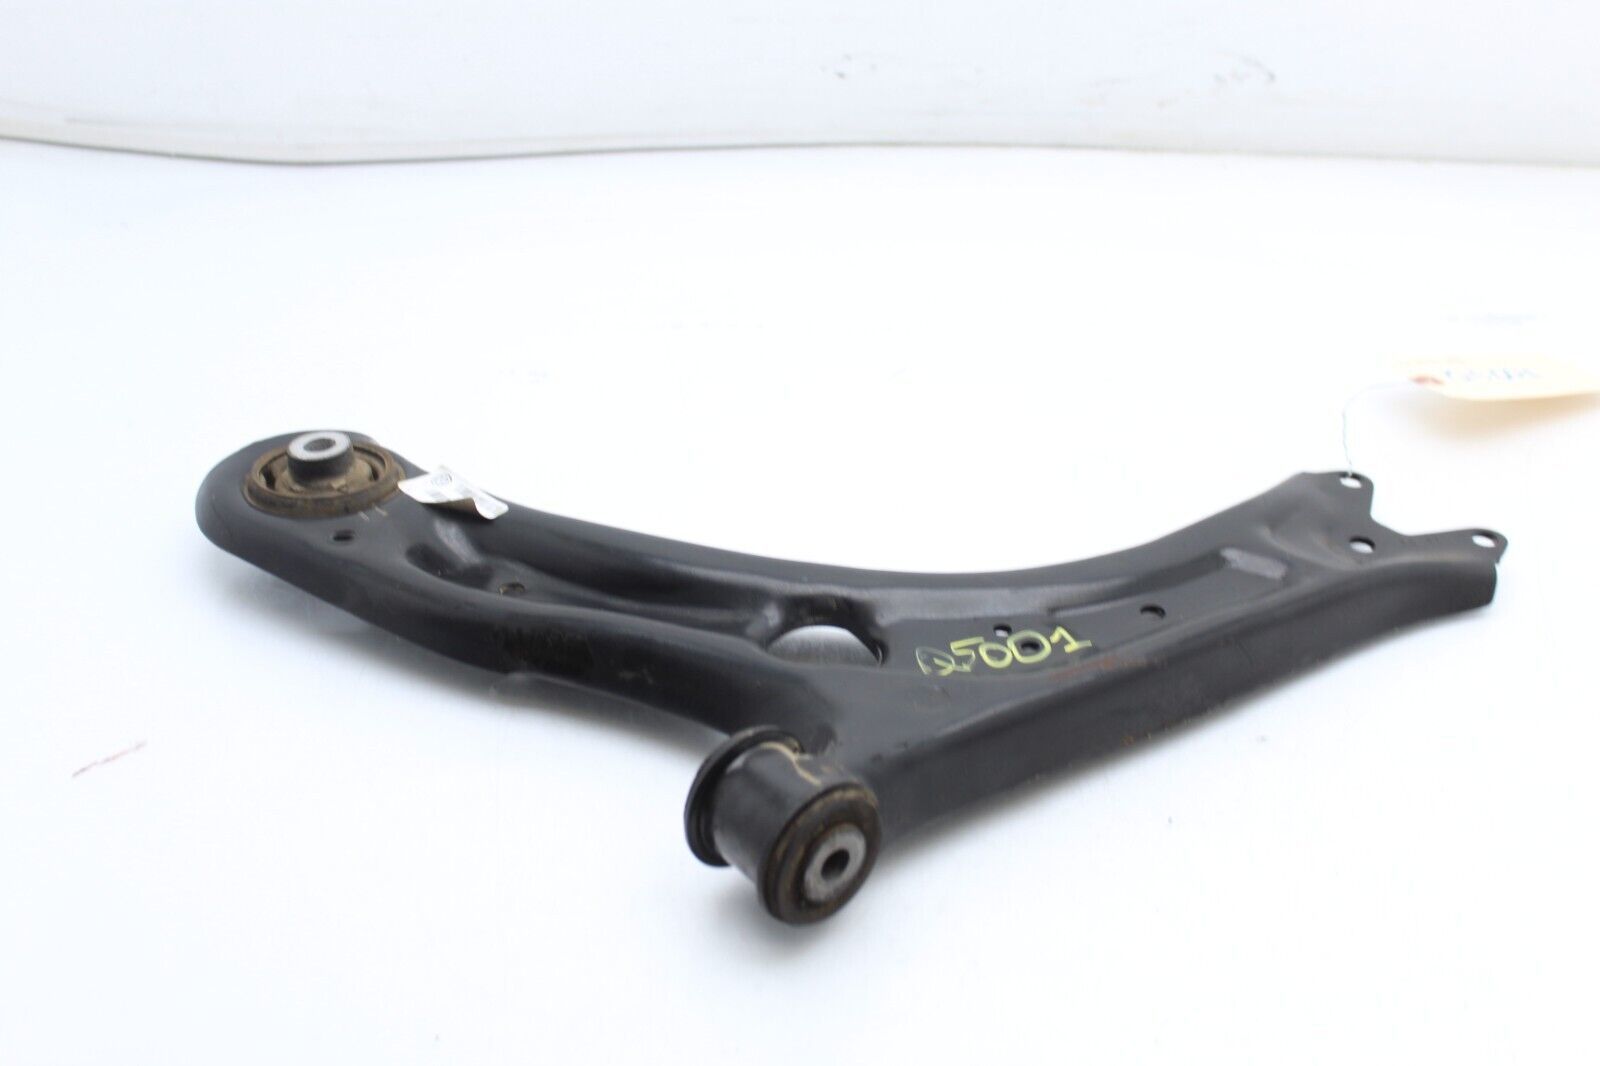 Primary image for 11-18 VOLKSWAGEN JETTA 1.4L FRONT LEFT DRIVER SIDE LOWER CONTROL ARM Q5001